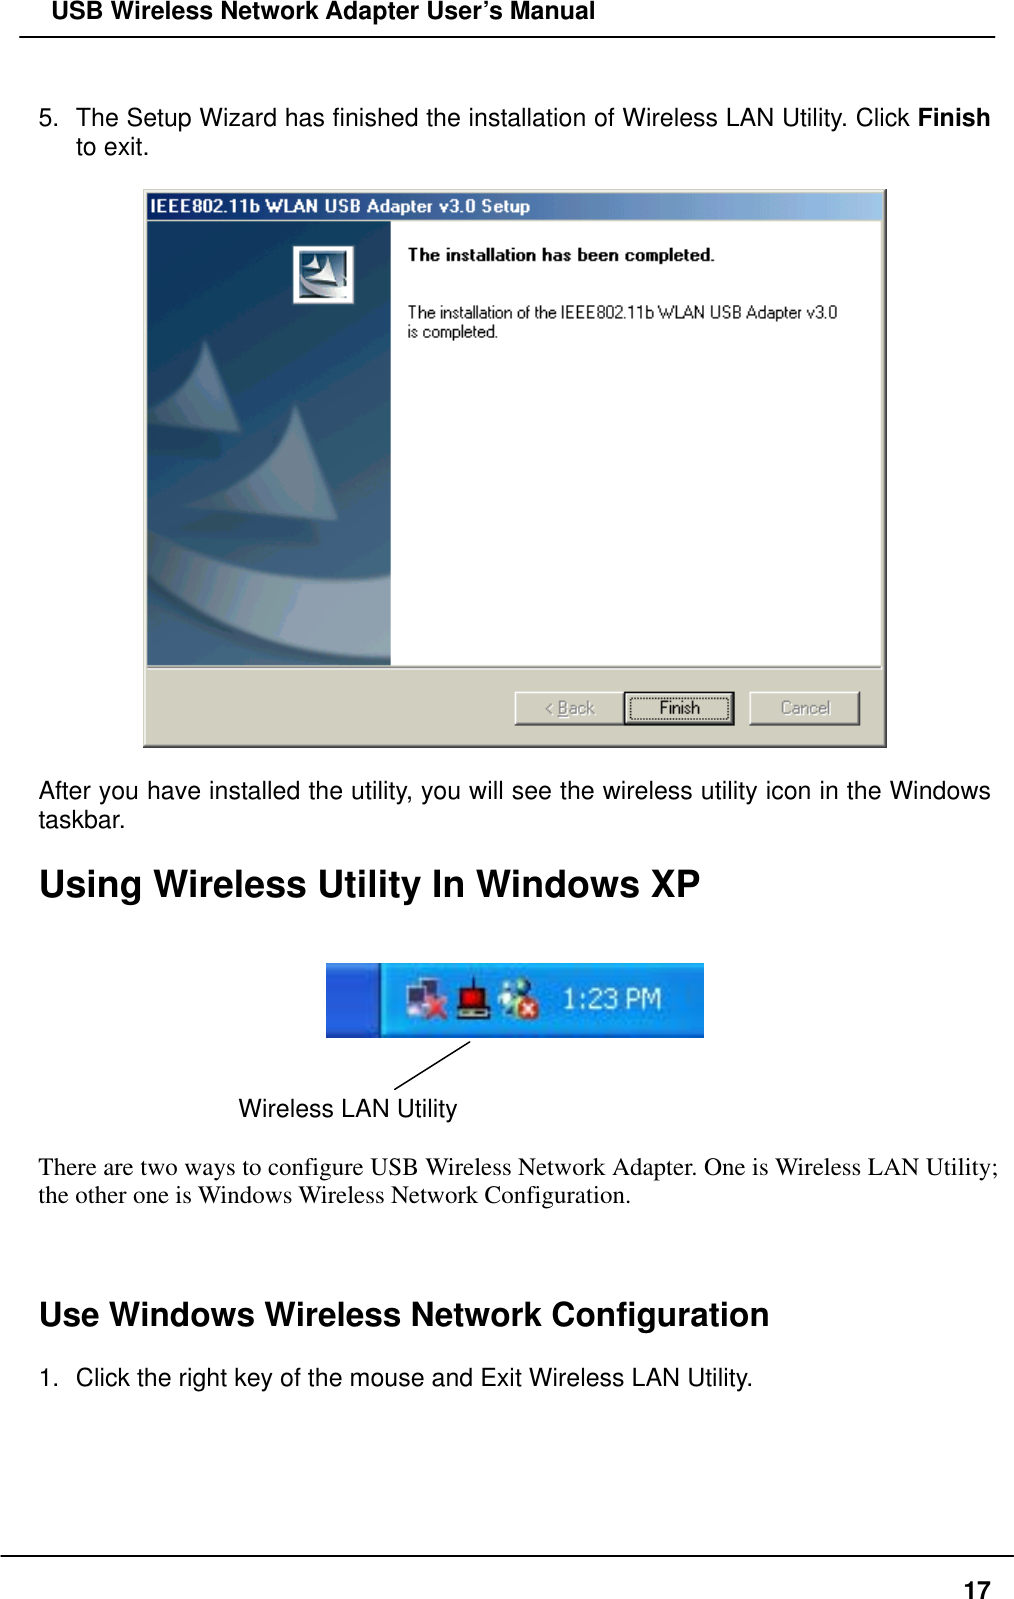   USB Wireless Network Adapter User’s Manual  5.  The Setup Wizard has finished the installation of Wireless LAN Utility. Click Finish to exit.      After you have installed the utility, you will see the wireless utility icon in the Windows taskbar.  Using Wireless Utility In Windows XP      Wireless LAN Utility    There are two ways to configure USB Wireless Network Adapter. One is Wireless LAN Utility; the other one is Windows Wireless Network Configuration.    Use Windows Wireless Network Configuration  1.  Click the right key of the mouse and Exit Wireless LAN Utility.   17